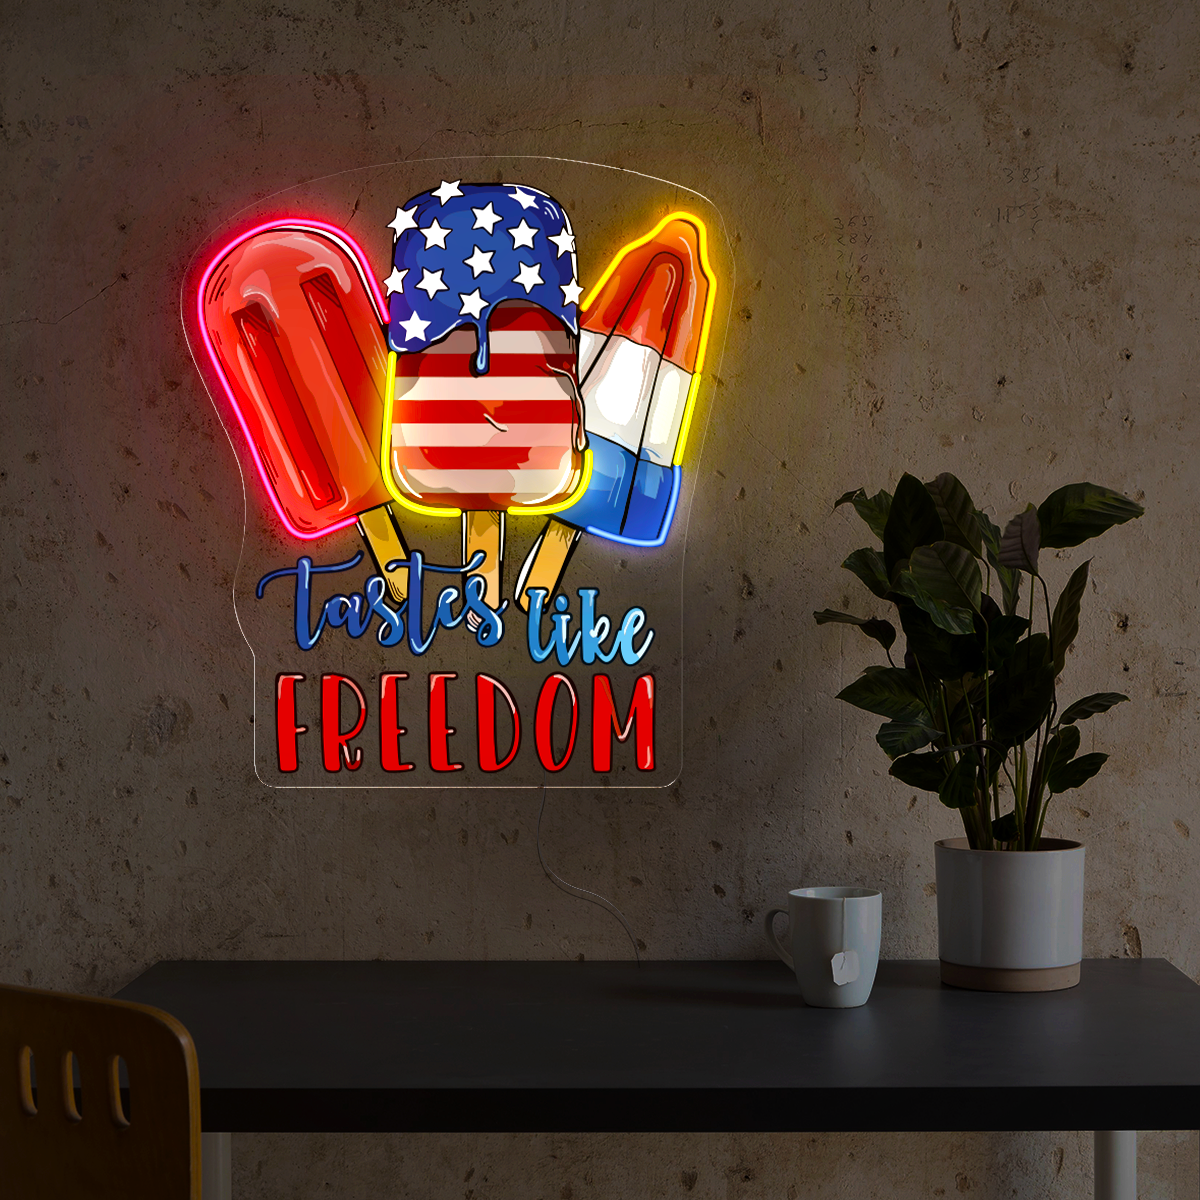 Red Blue White Popsicle Artwork Neon Sign